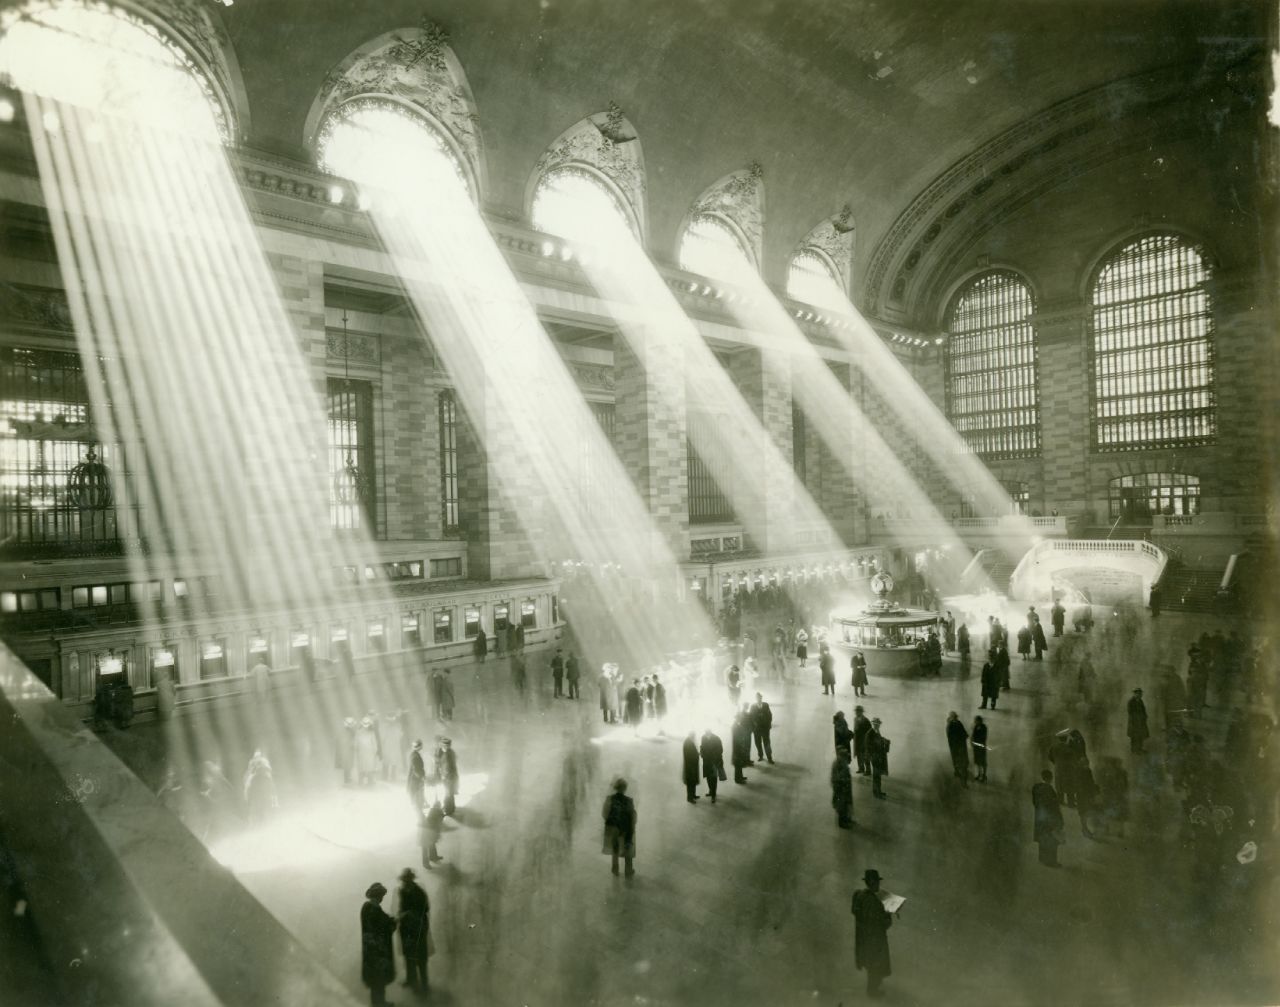 After 10 years of construction, Grand Central Terminal opened on February 1, 1913. The first train pulled out at 12:01 a.m. on Sunday, February 2, 1913. More than 150,000 people visited the new terminal on opening day. 